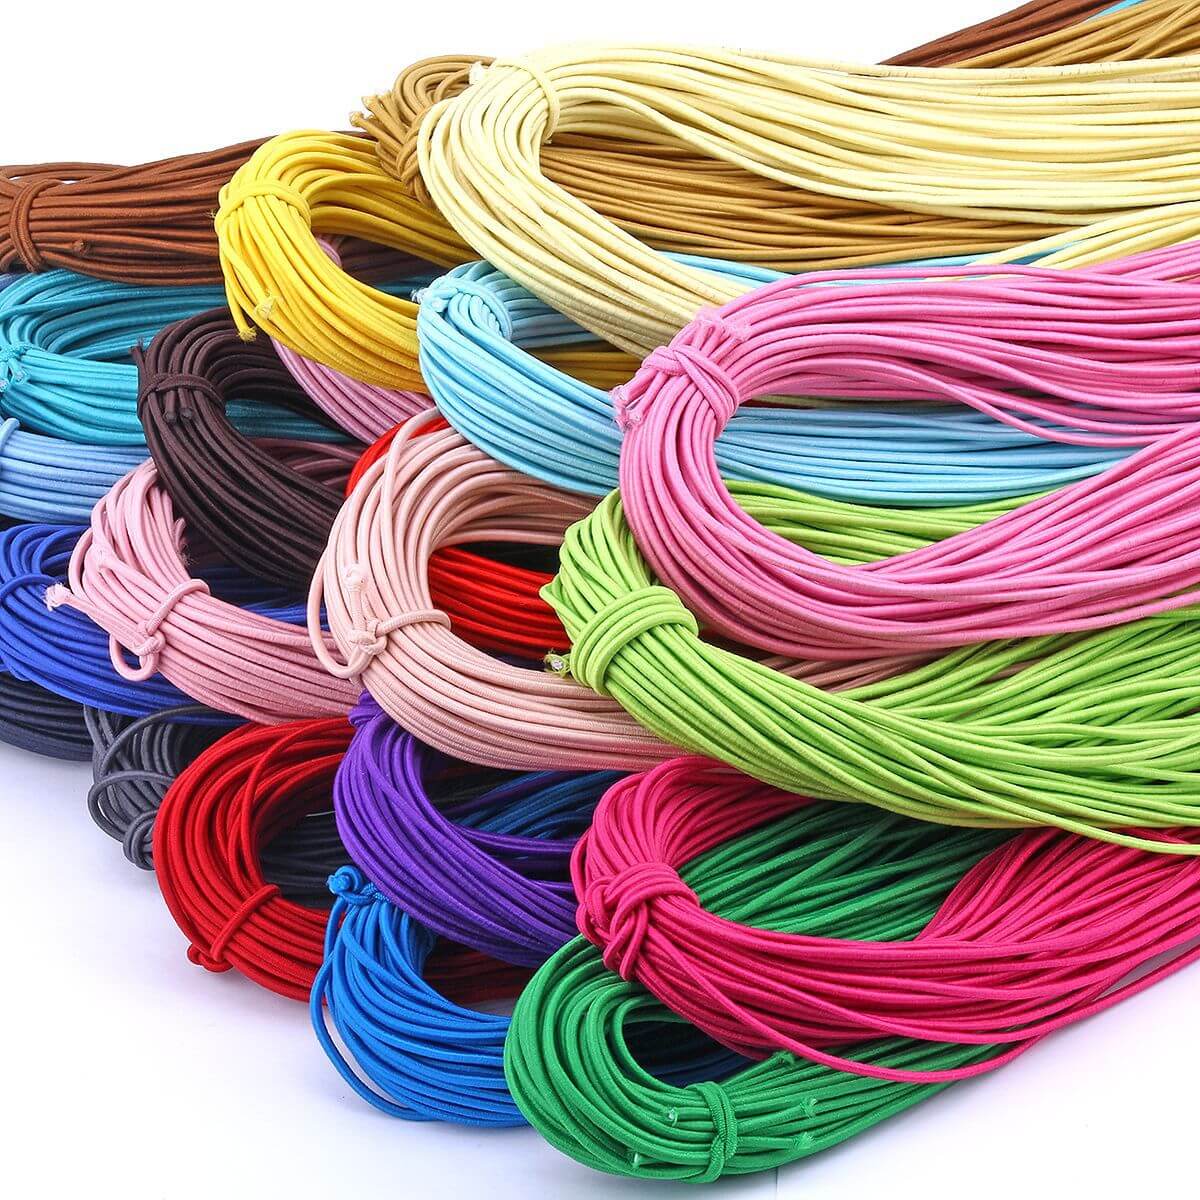 Ready stock 2mm wide colorful elastic cord